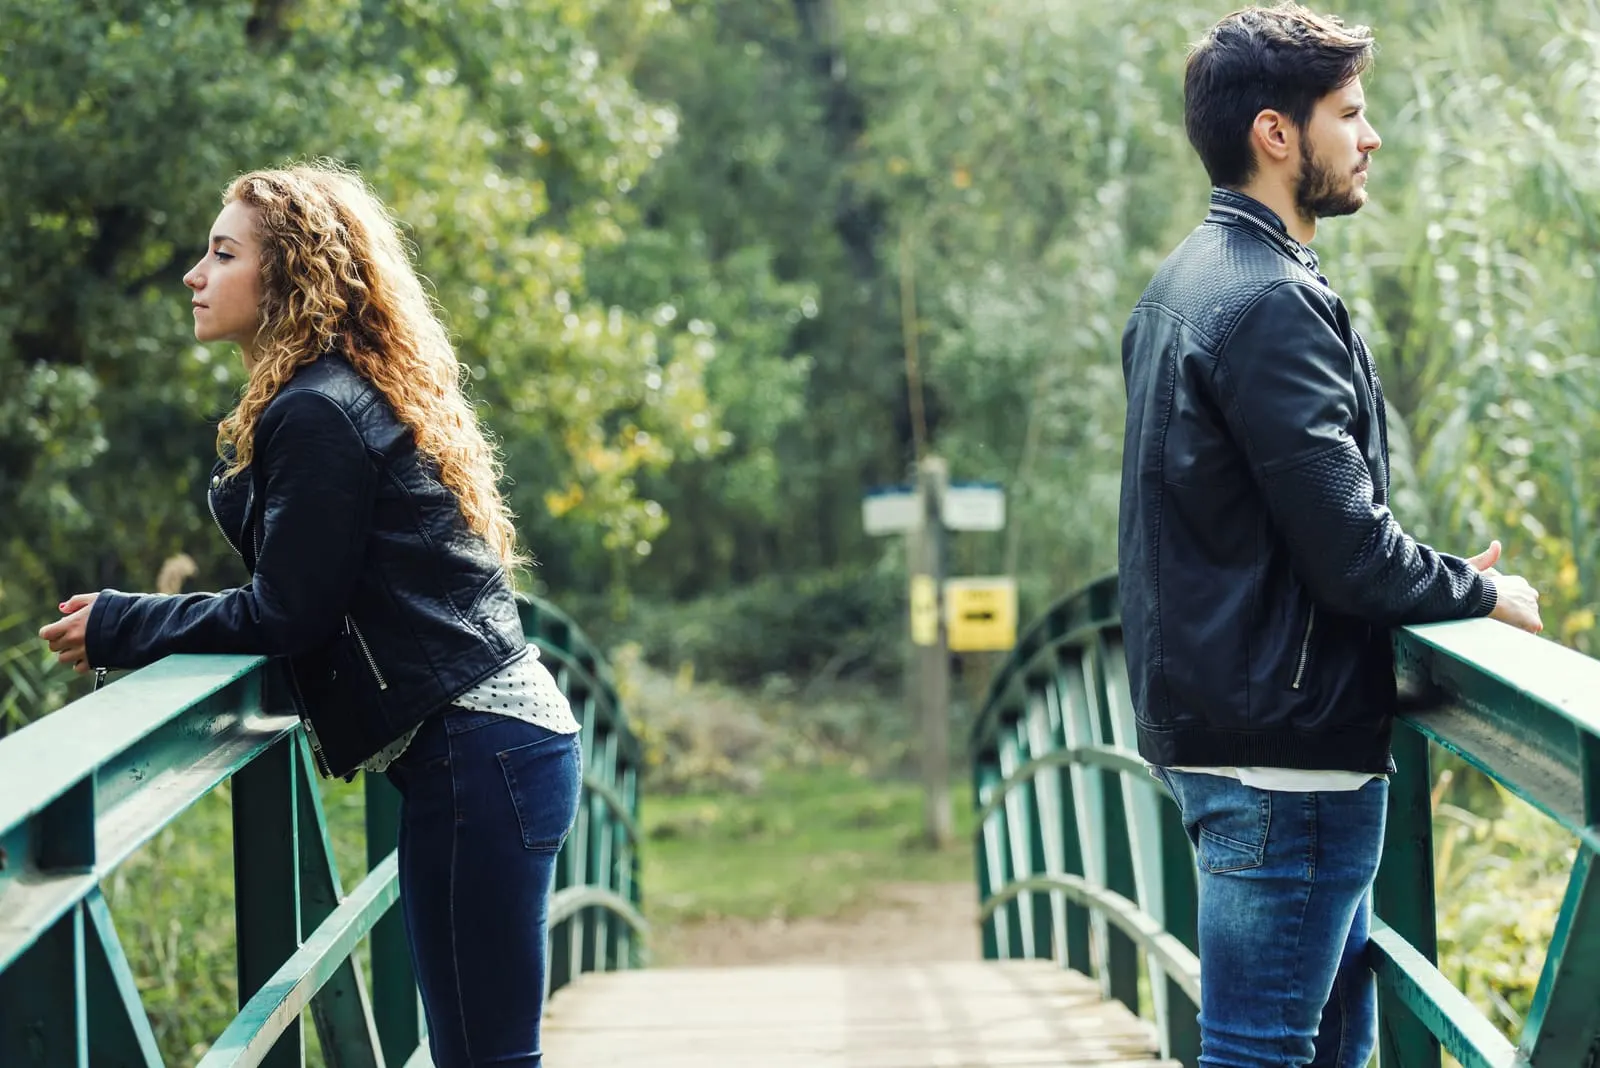 the couple stands on the bridge with their backs to each other after an argument